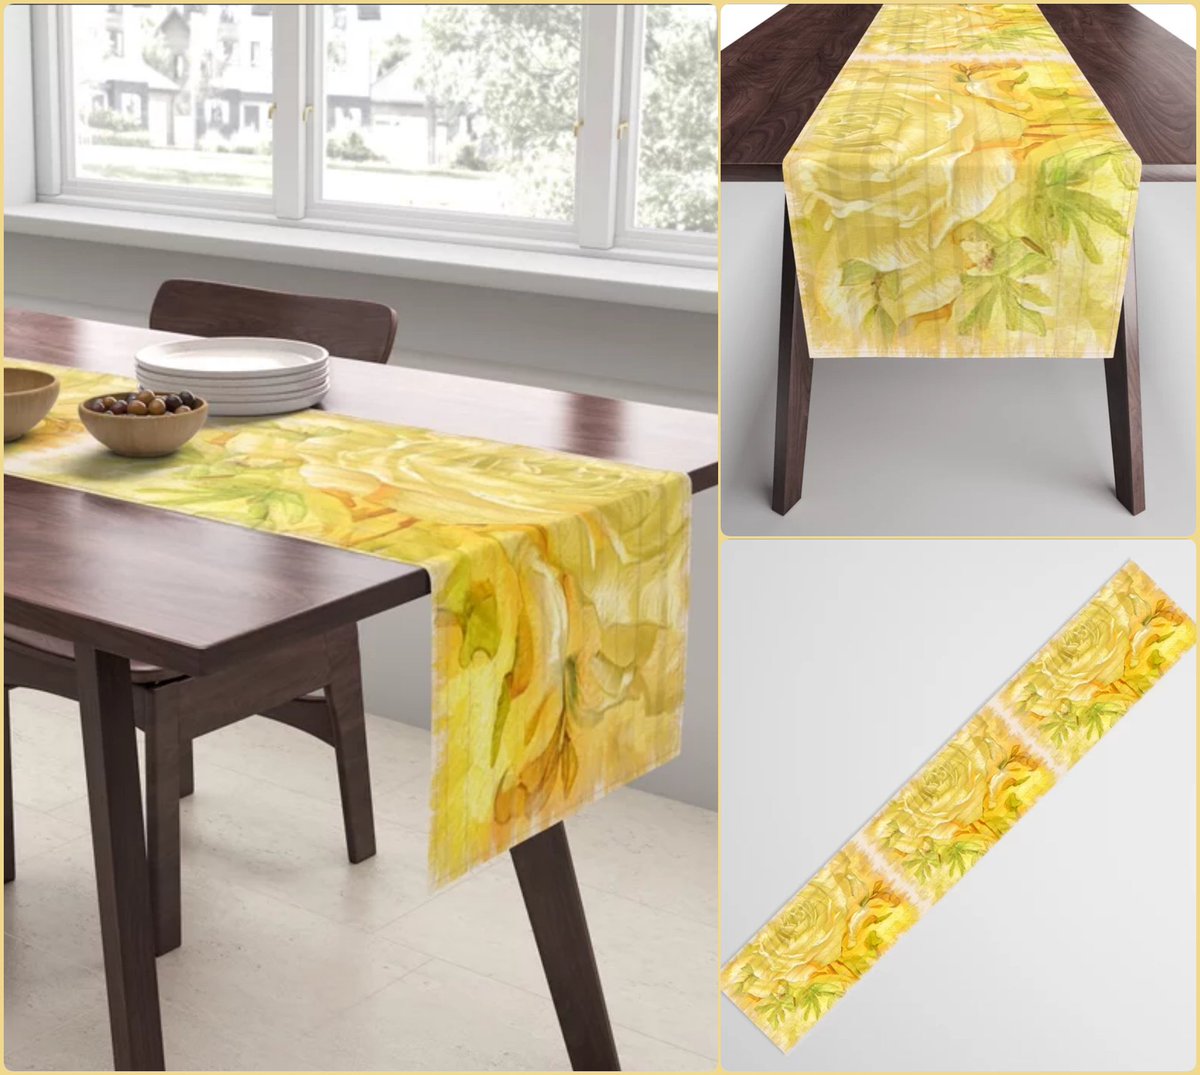 Yellow Rose Table Runner~Art Exquisite!~ #coasters #gifts #trays #mugs #coffee #society6 #travel #coolers #artfalaxy #art #accents #modern #trendy #wine #water #interior #placemats #tablecloths #runners #yellow #golden #orange

society6.com/product/yellow…